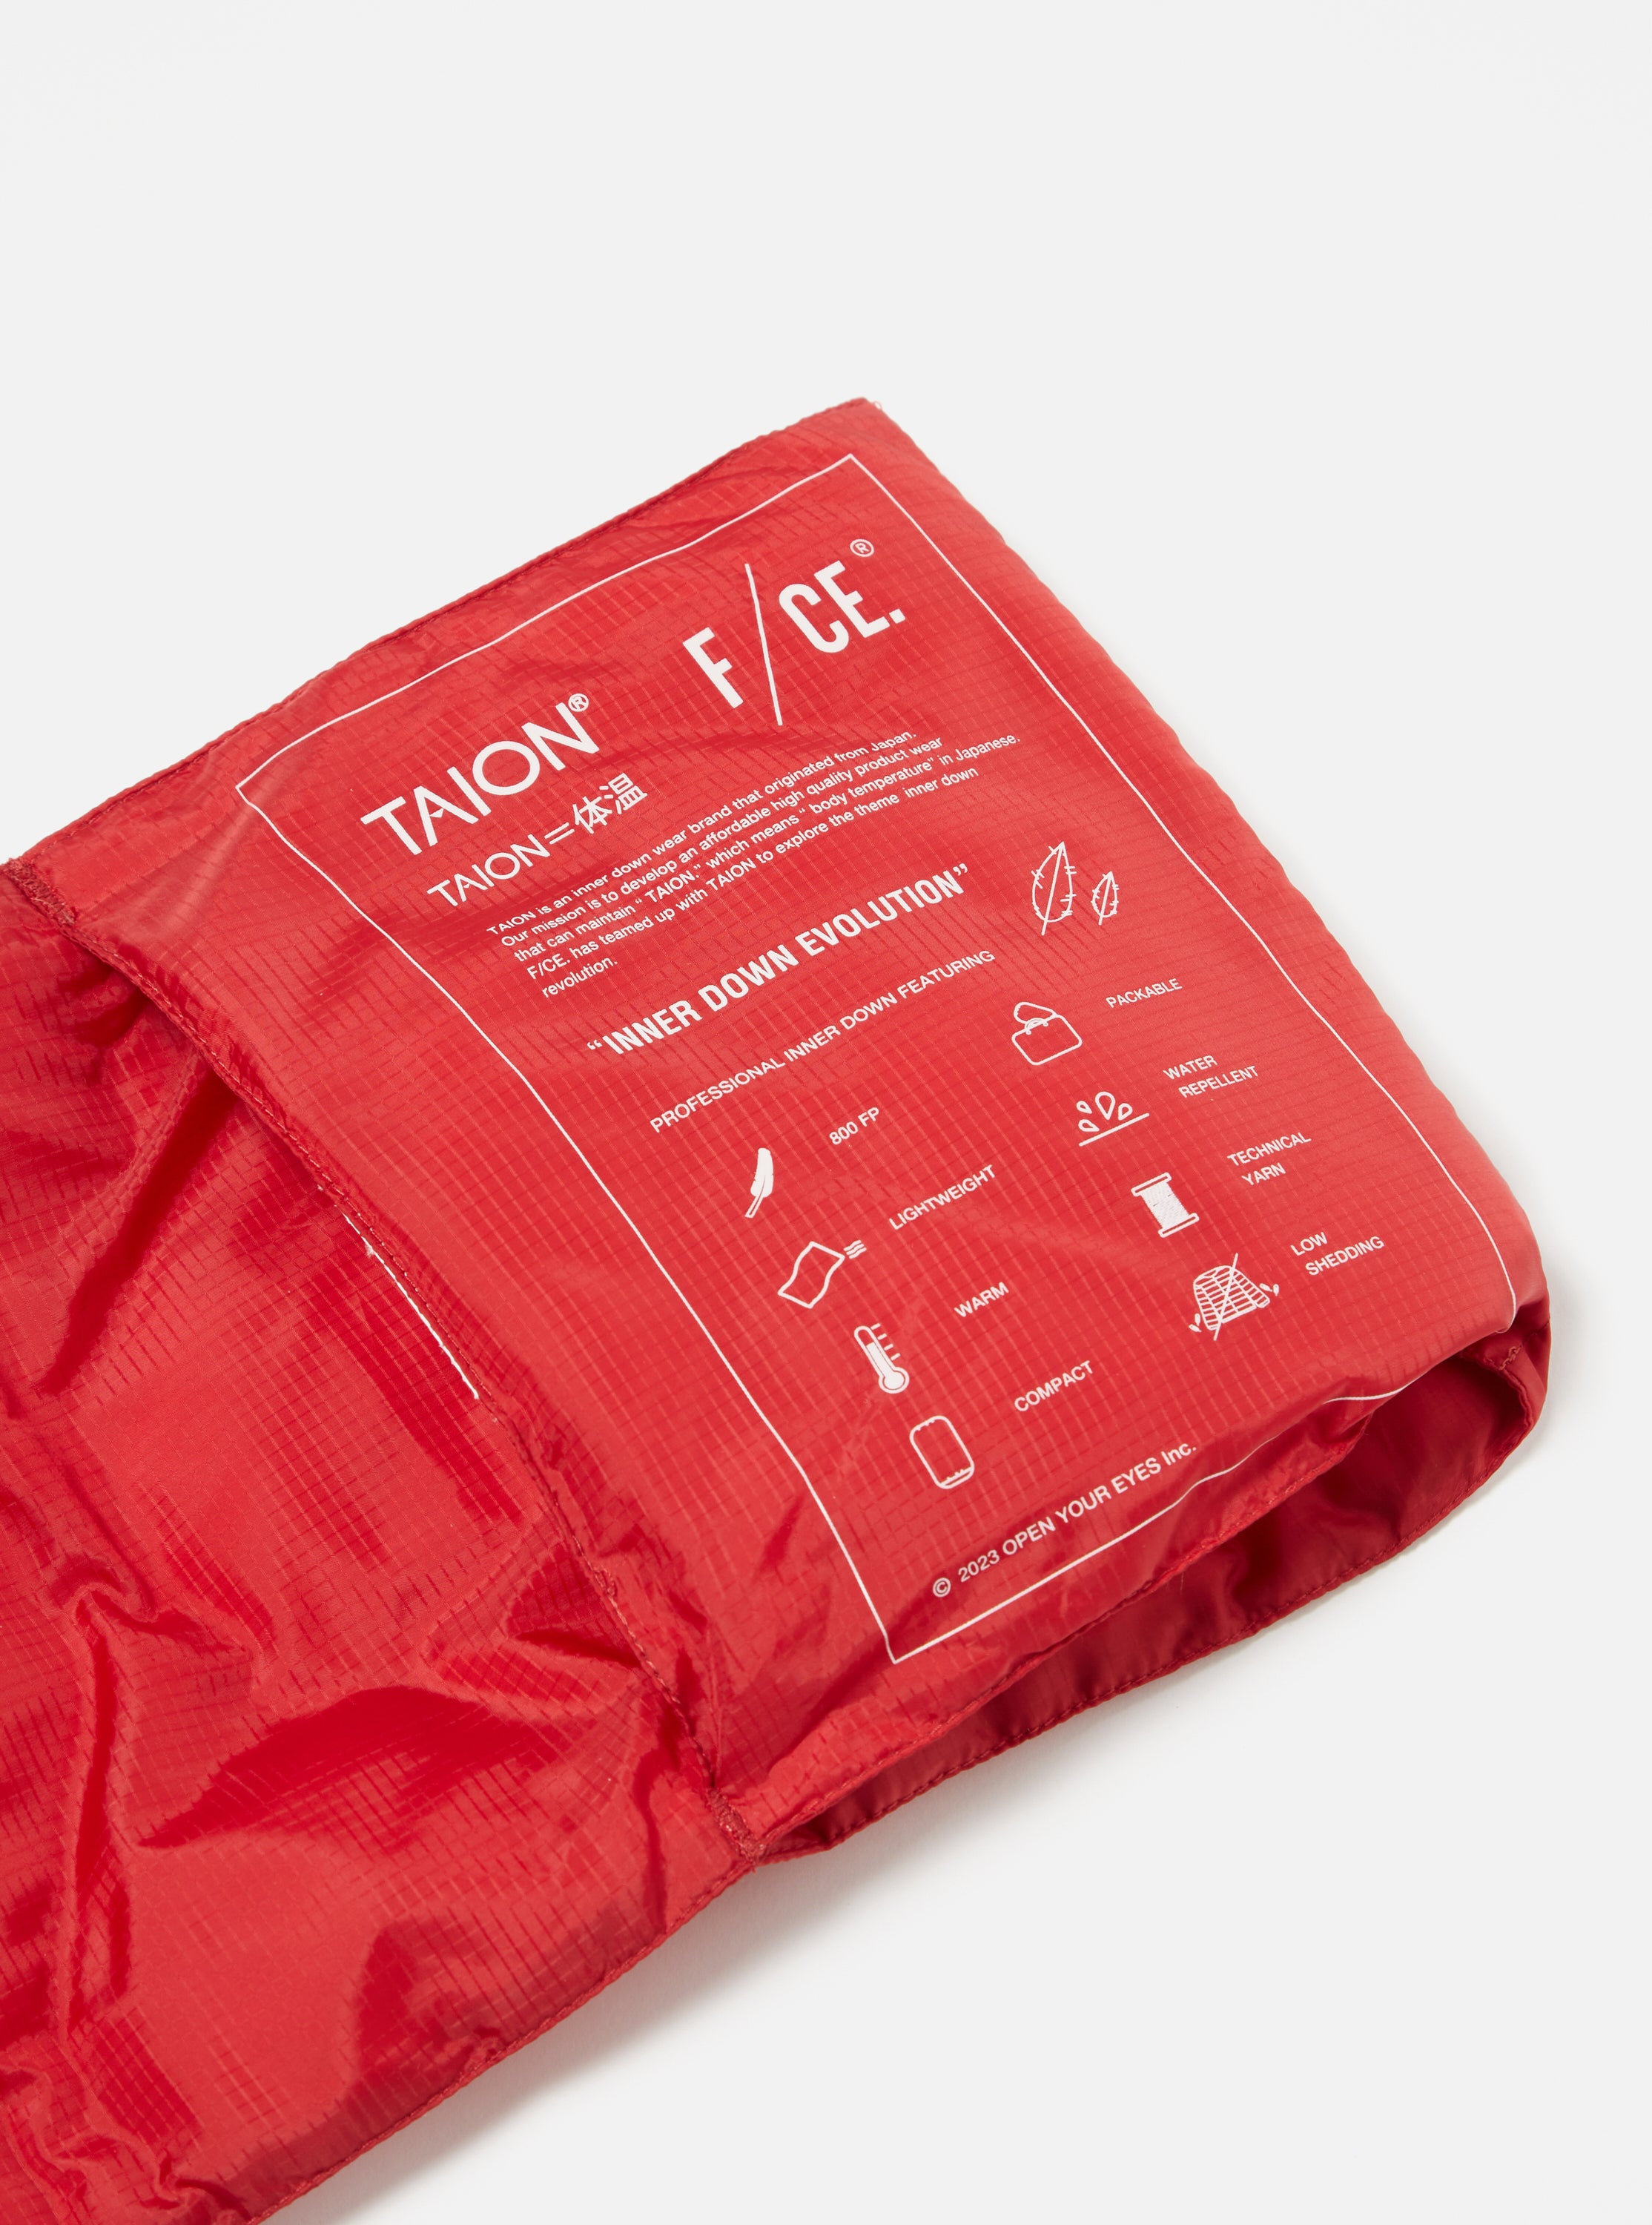 Taion by F/CE. Packable Down Scarf in Red Nylon Ripstop/Duck Down